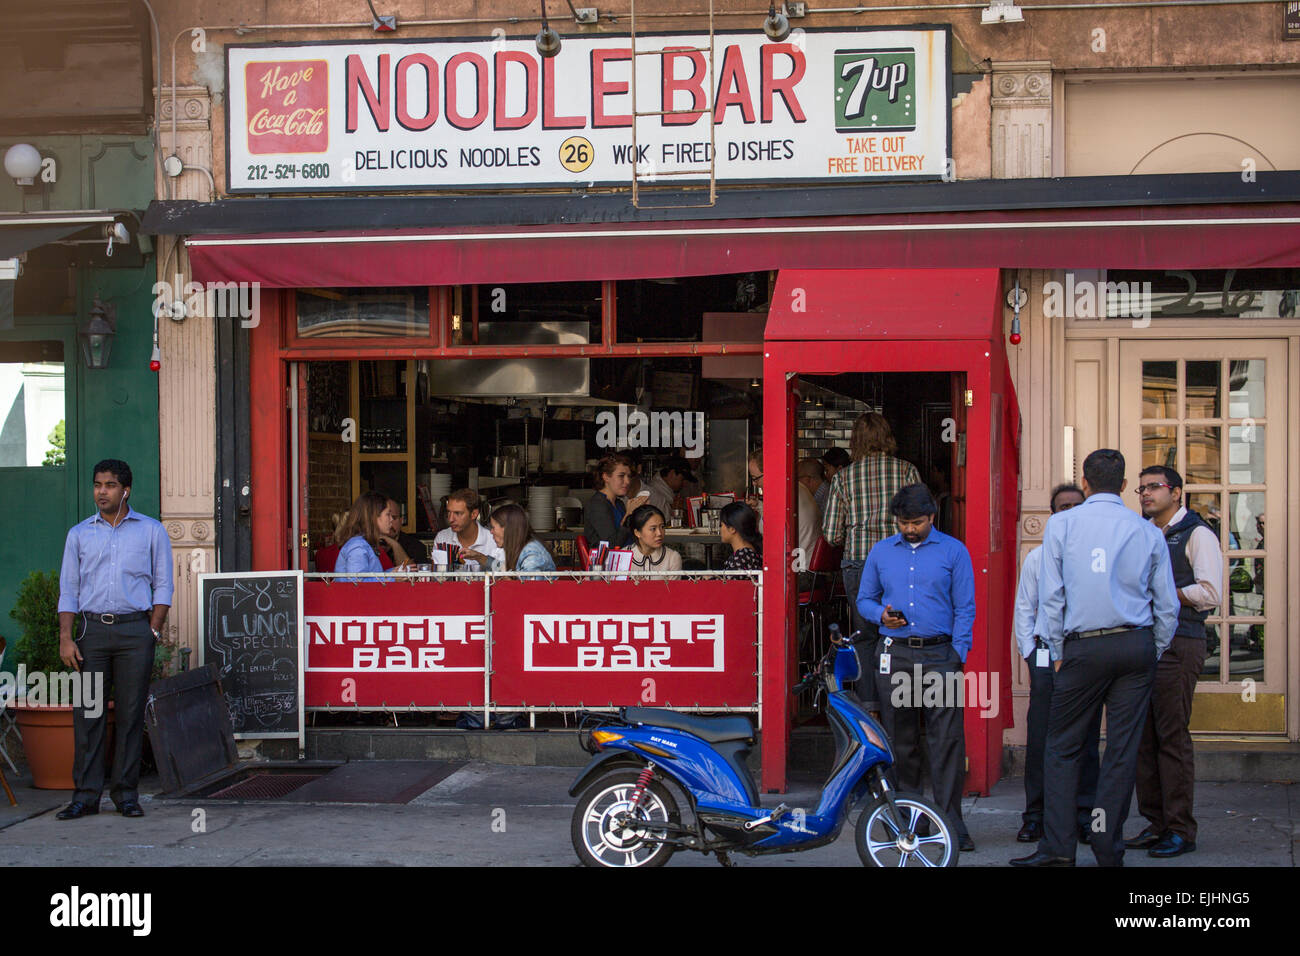 Noodle Bar in Greenwich Village, New York City, USA Stockfoto